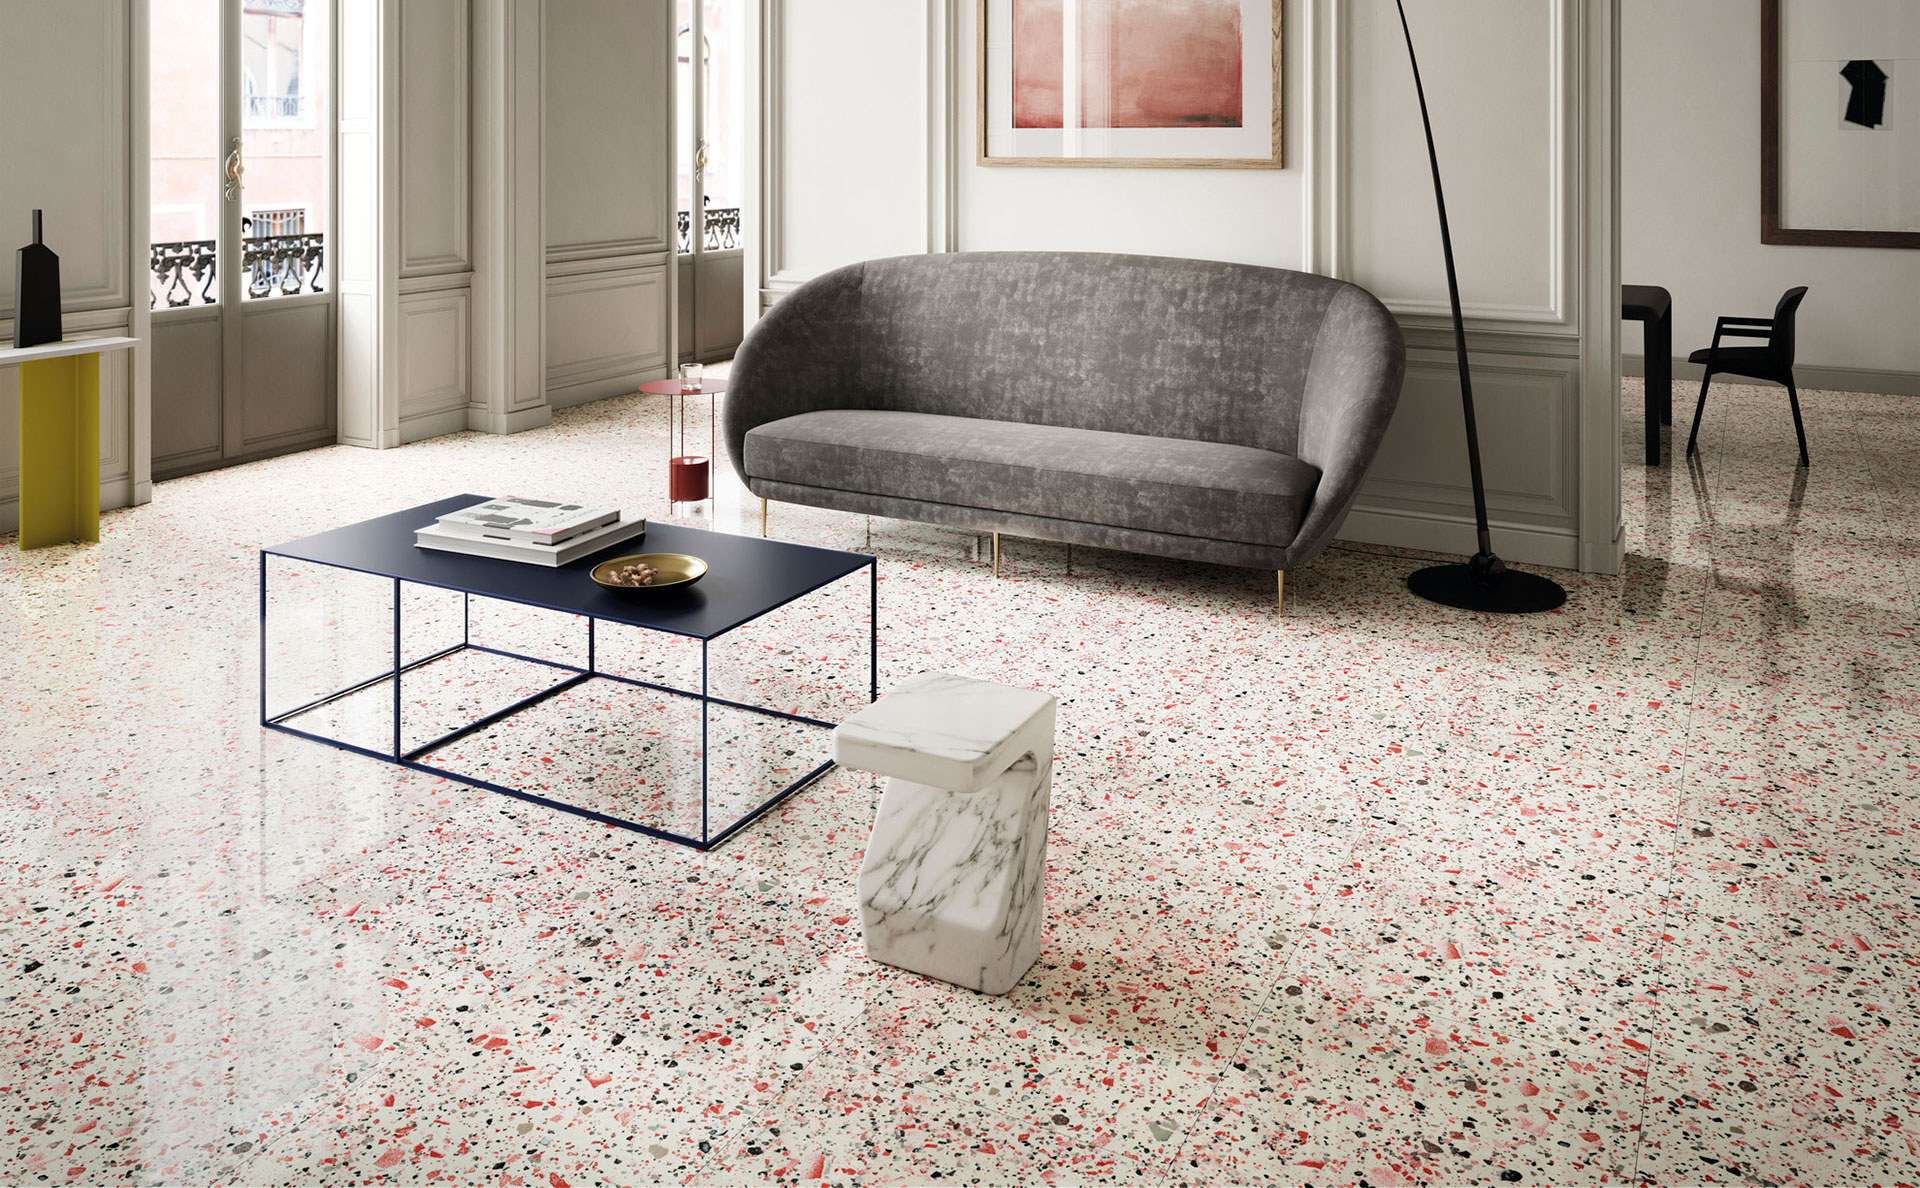 Know About the Types and benefits of Terrazzo Tiles